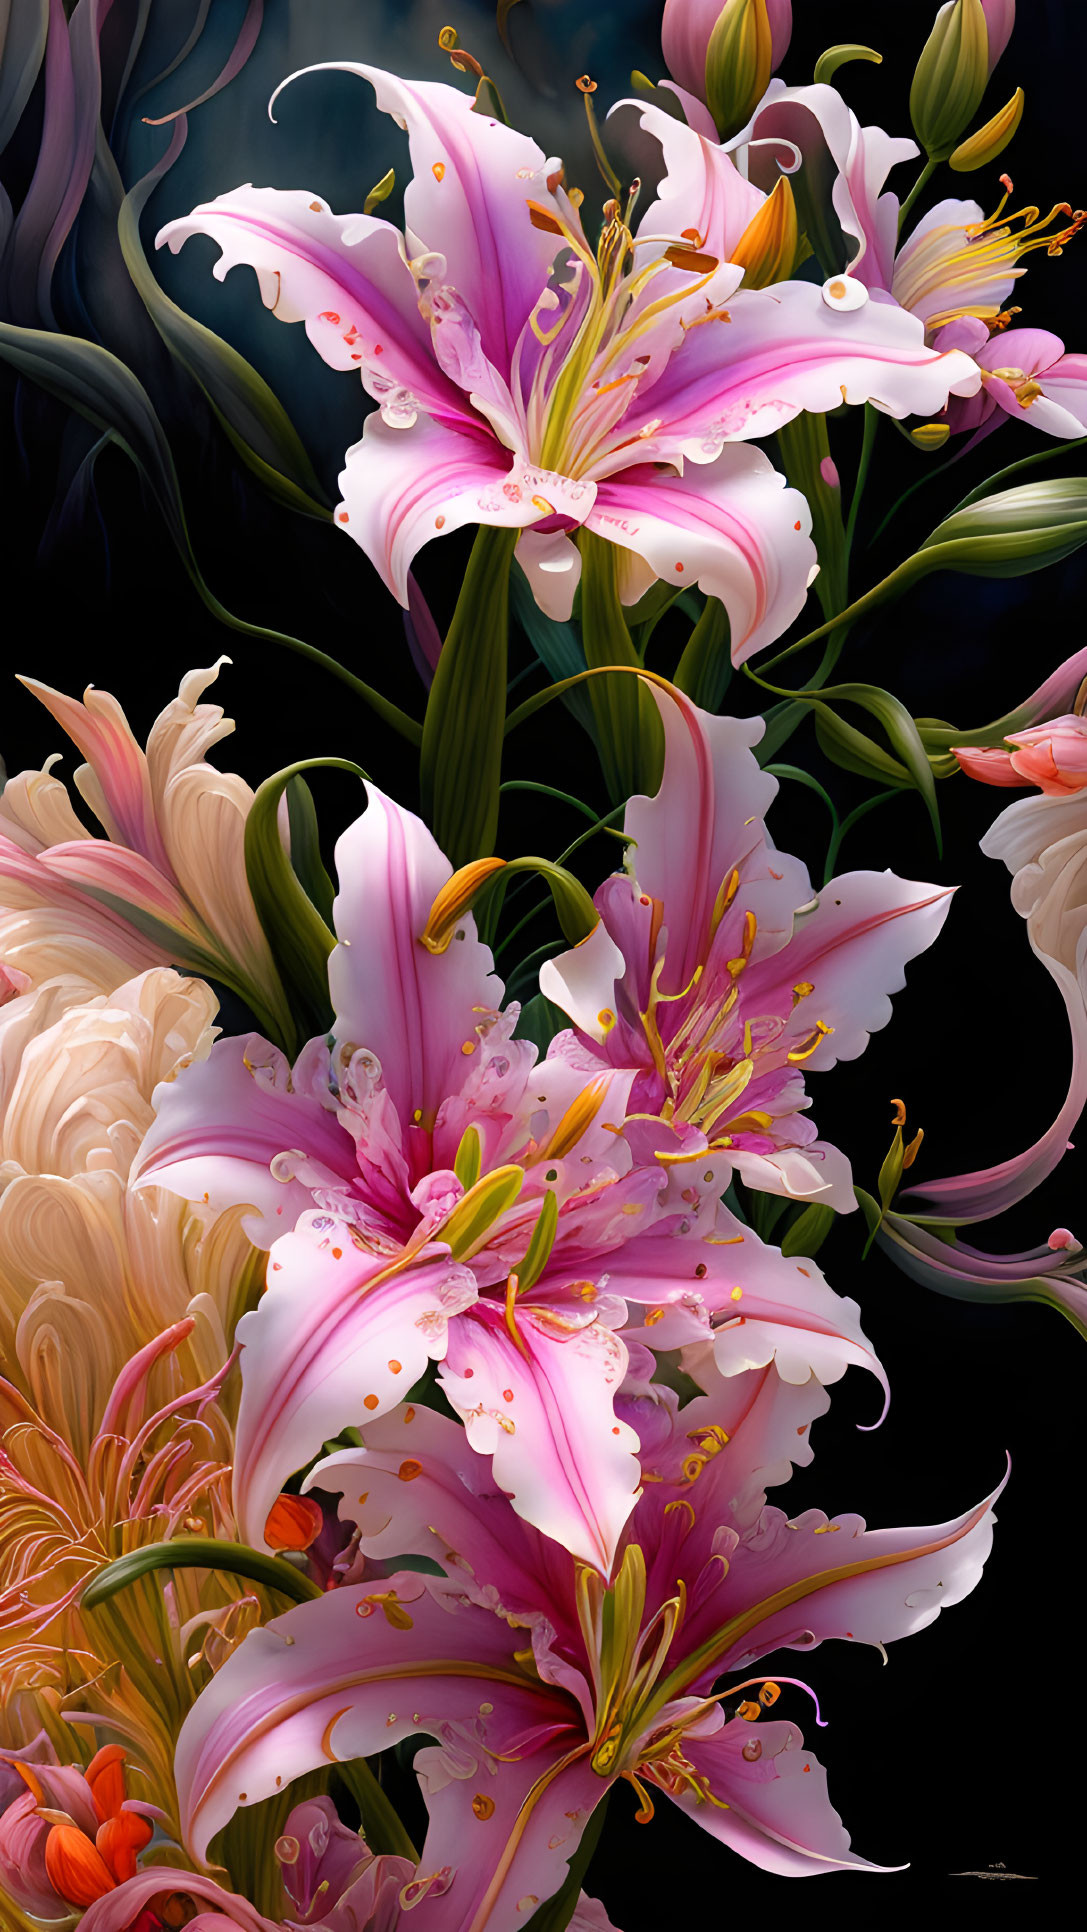 Detailed digital illustration of pink and white lilies on dark background